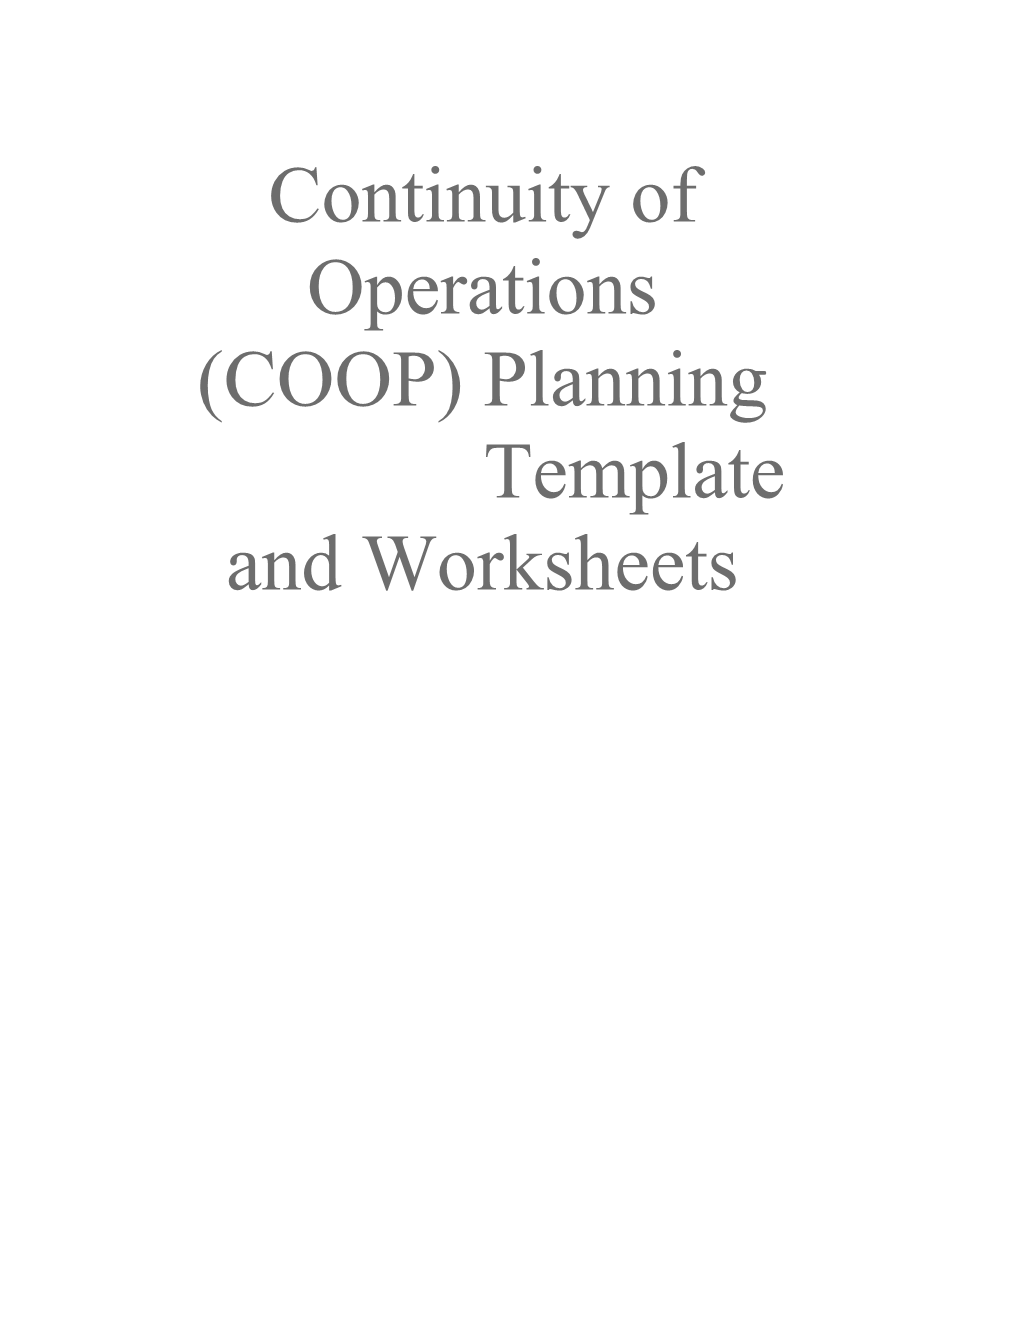 Continuityof Operations (COOP) Planning Template and Worksheets